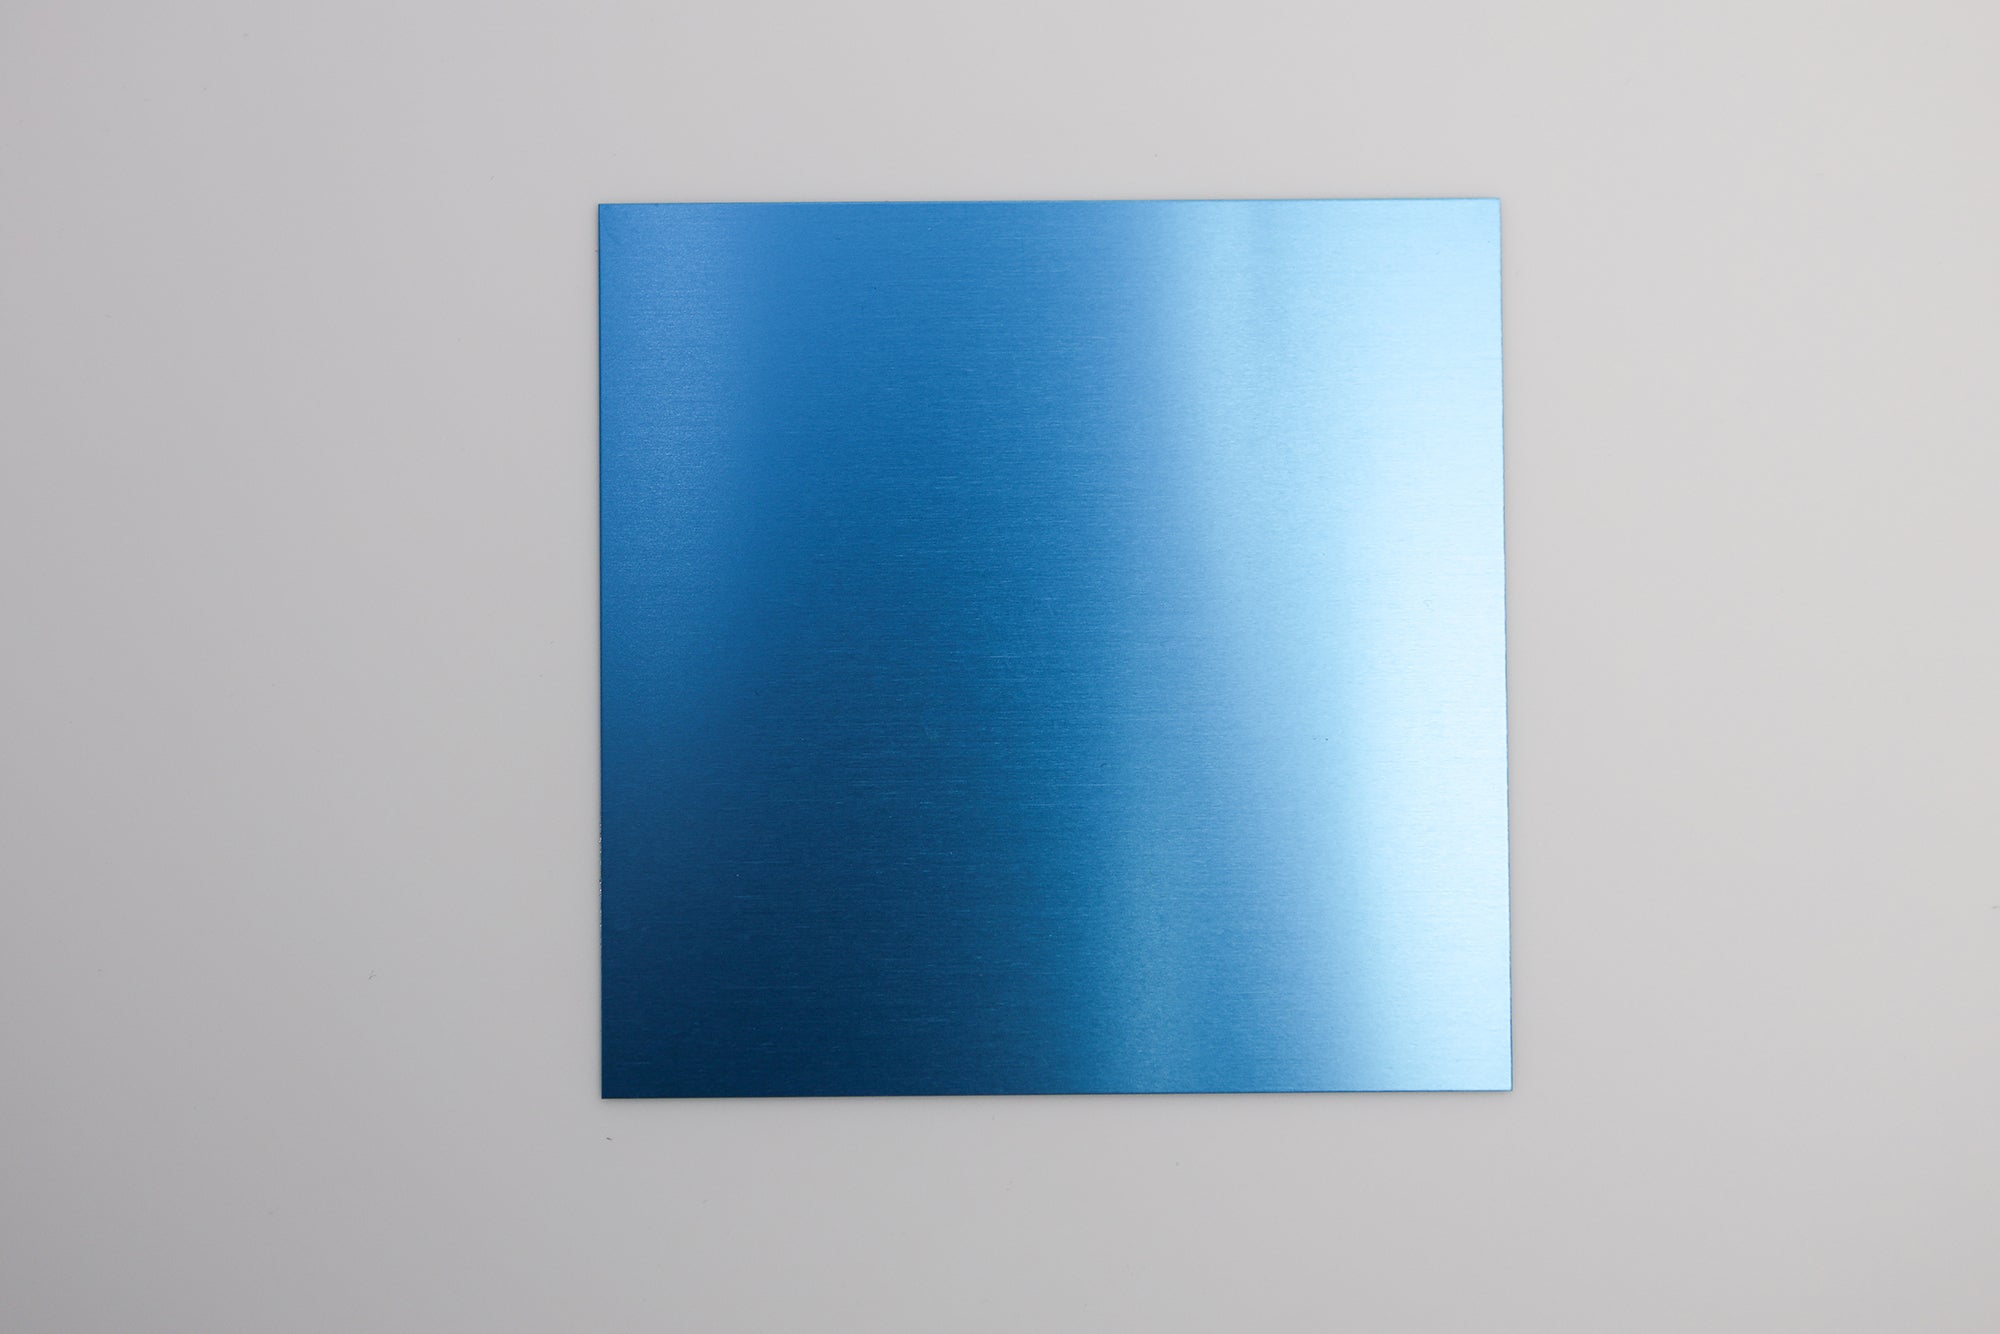 Indoor Anodised Aluminium Sheet Sky 570W x 390H x 0.5mm or 1mm Thickness